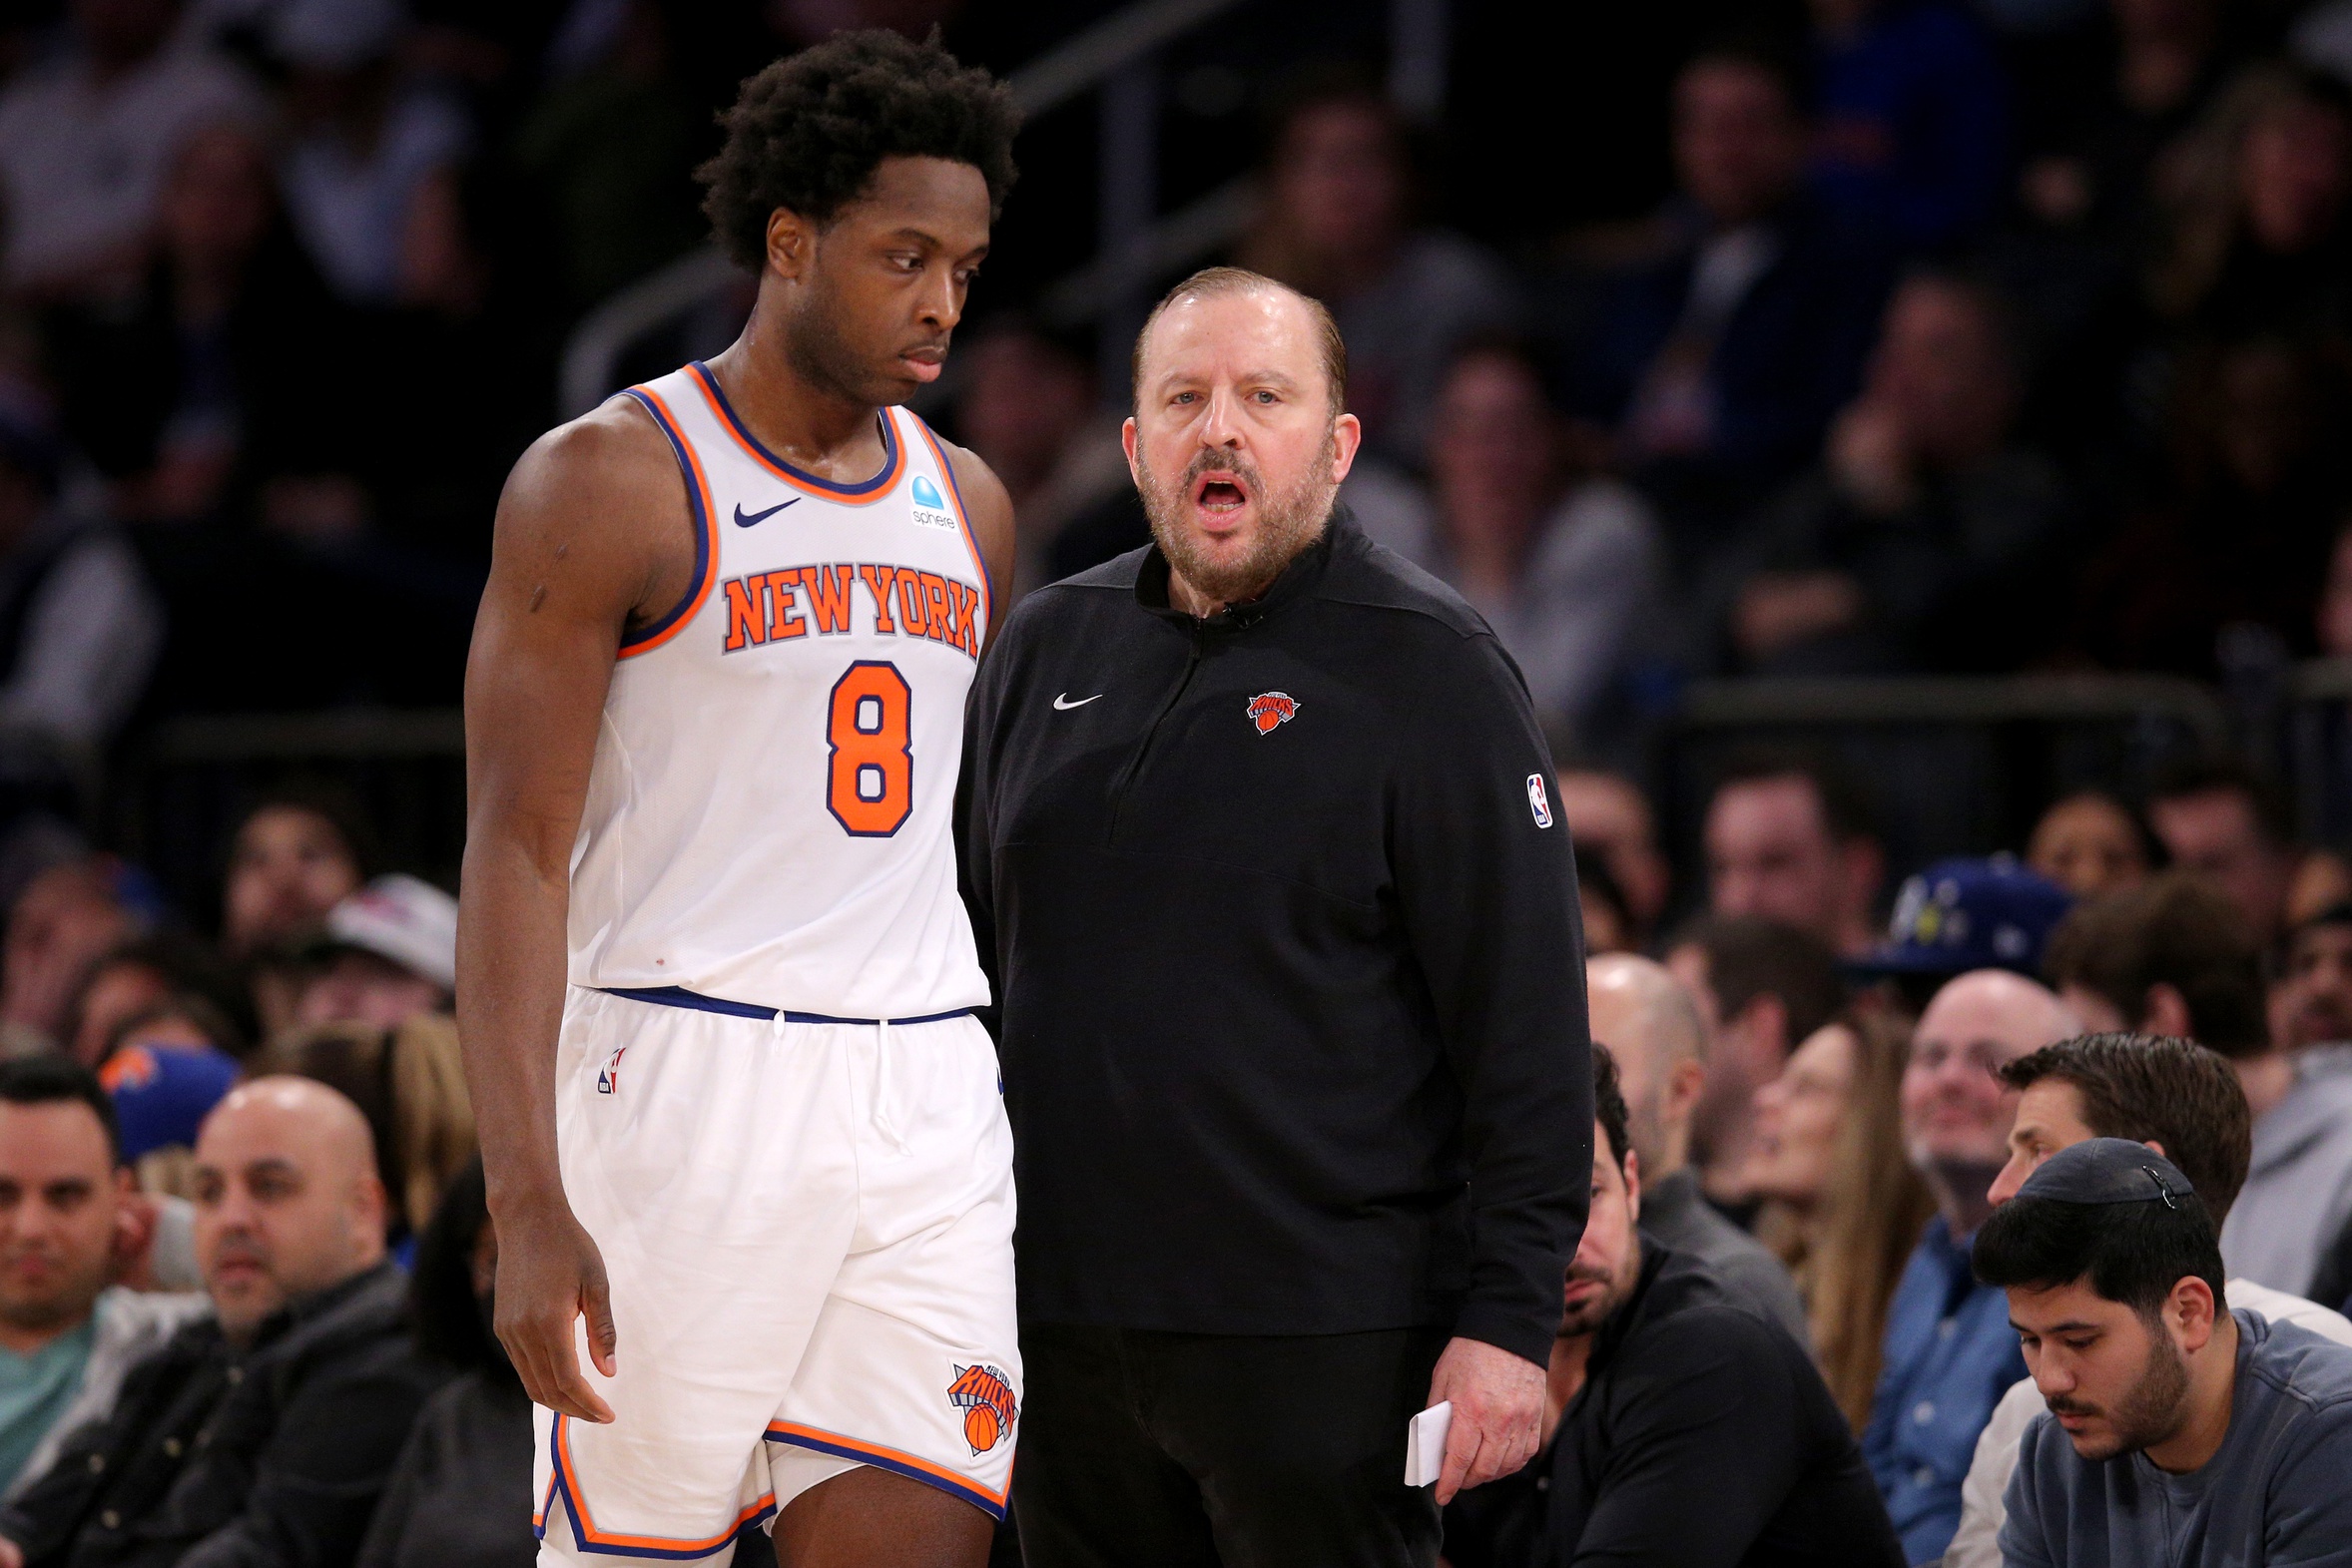 OG Anunoby Reacts to His Knicks Debut and Getting Traded